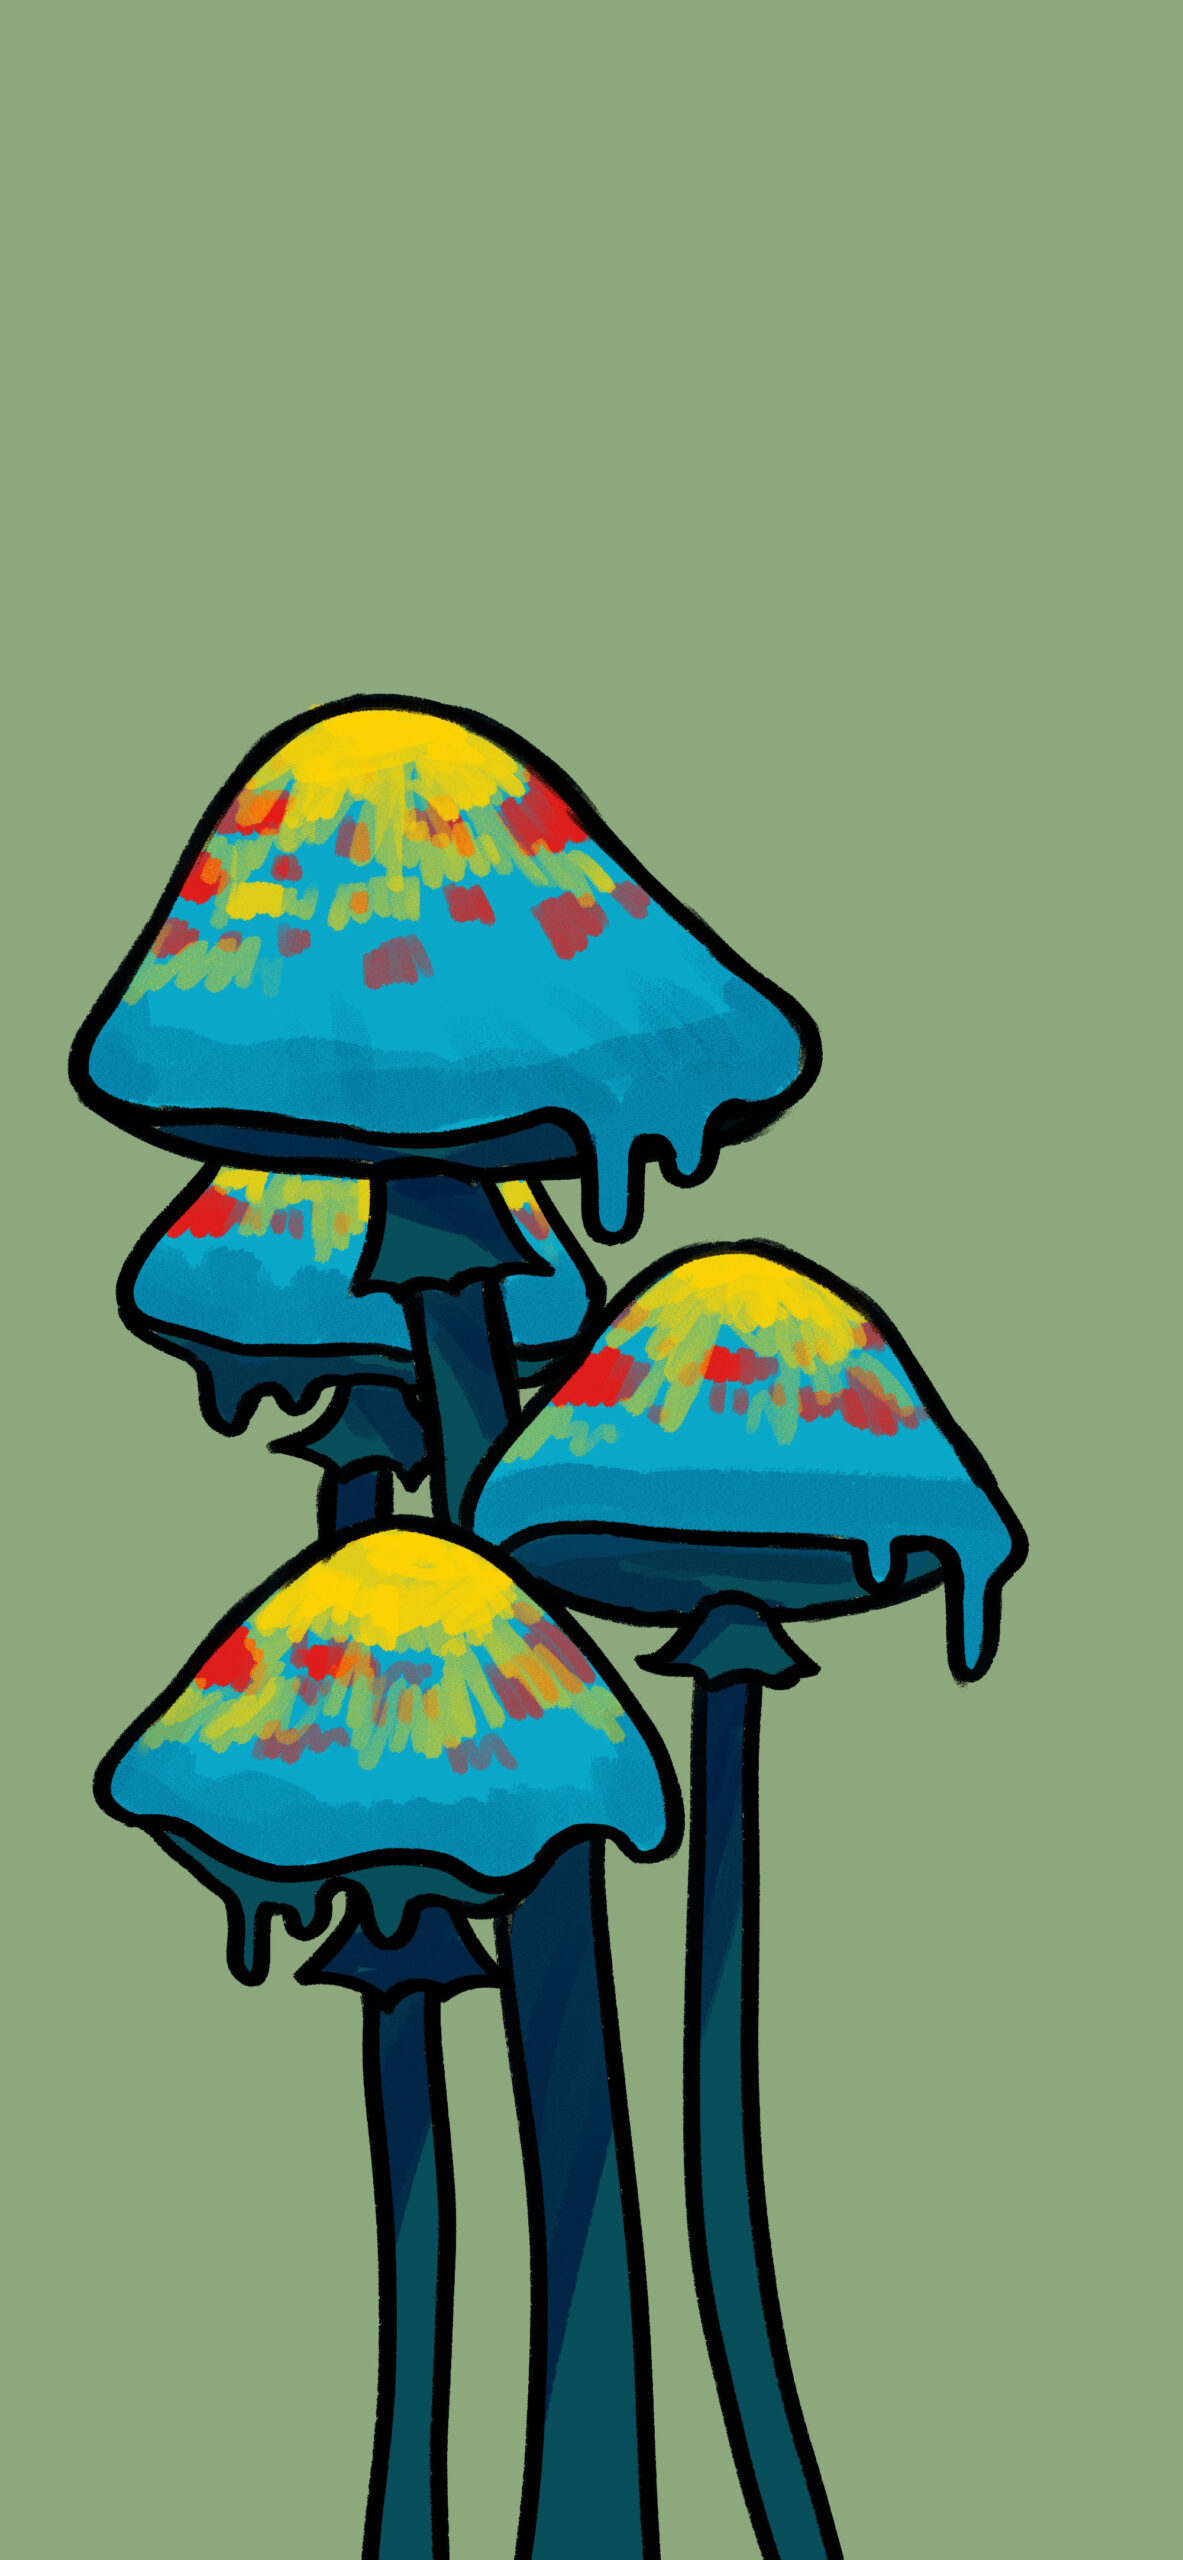 17784 Psychedelic Background Mushroom Images Stock Photos  Vectors   Shutterstock